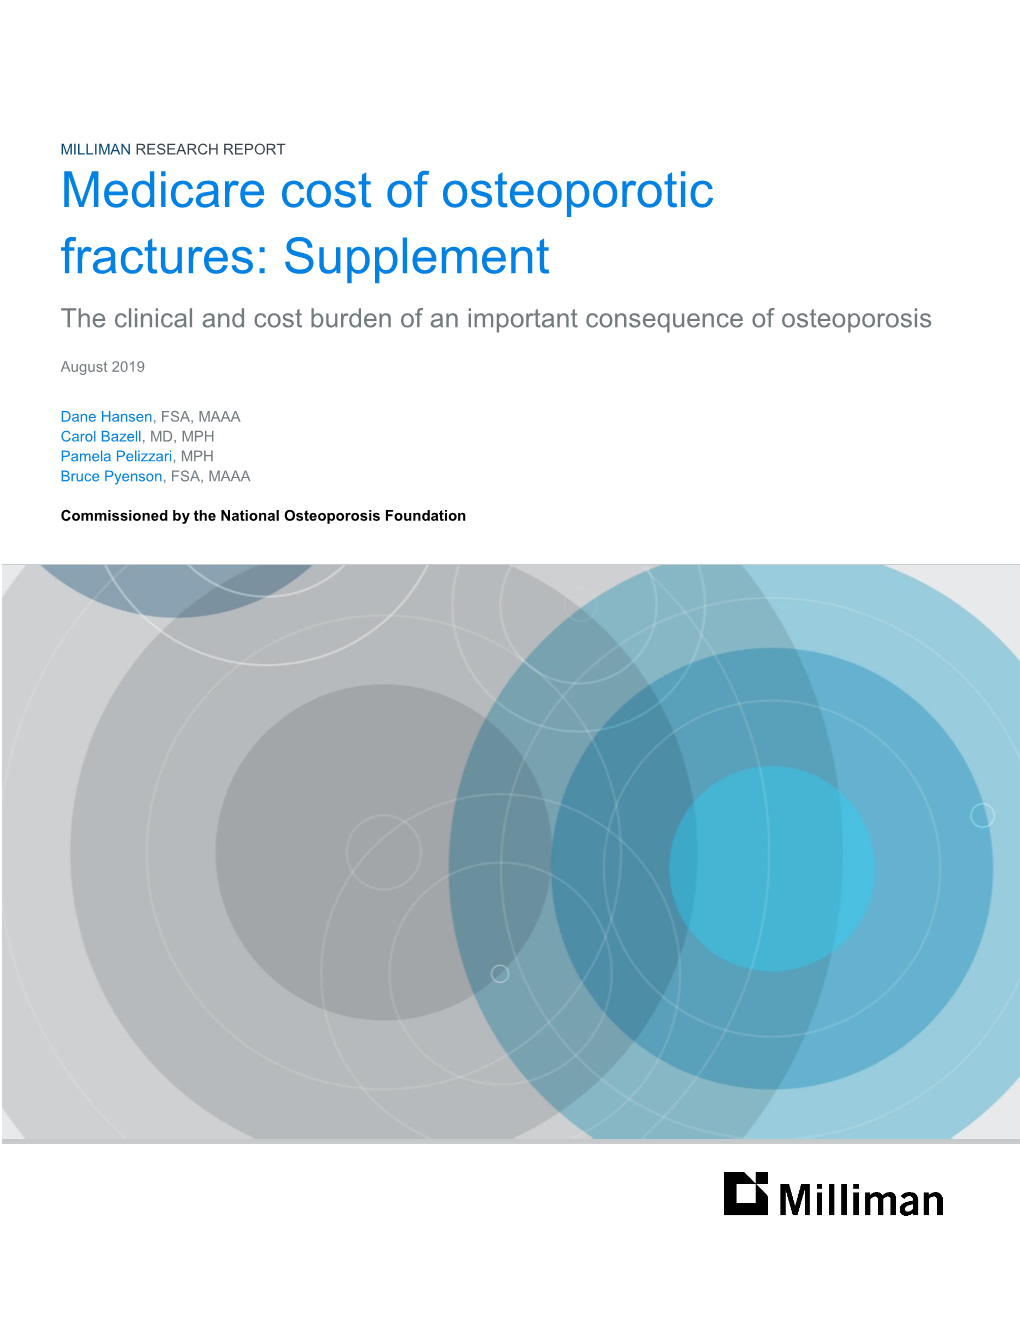 Medicare Cost of Osteoporotic Fractures: Supplement the Clinical and Cost Burden of an Important Consequence of Osteoporosis